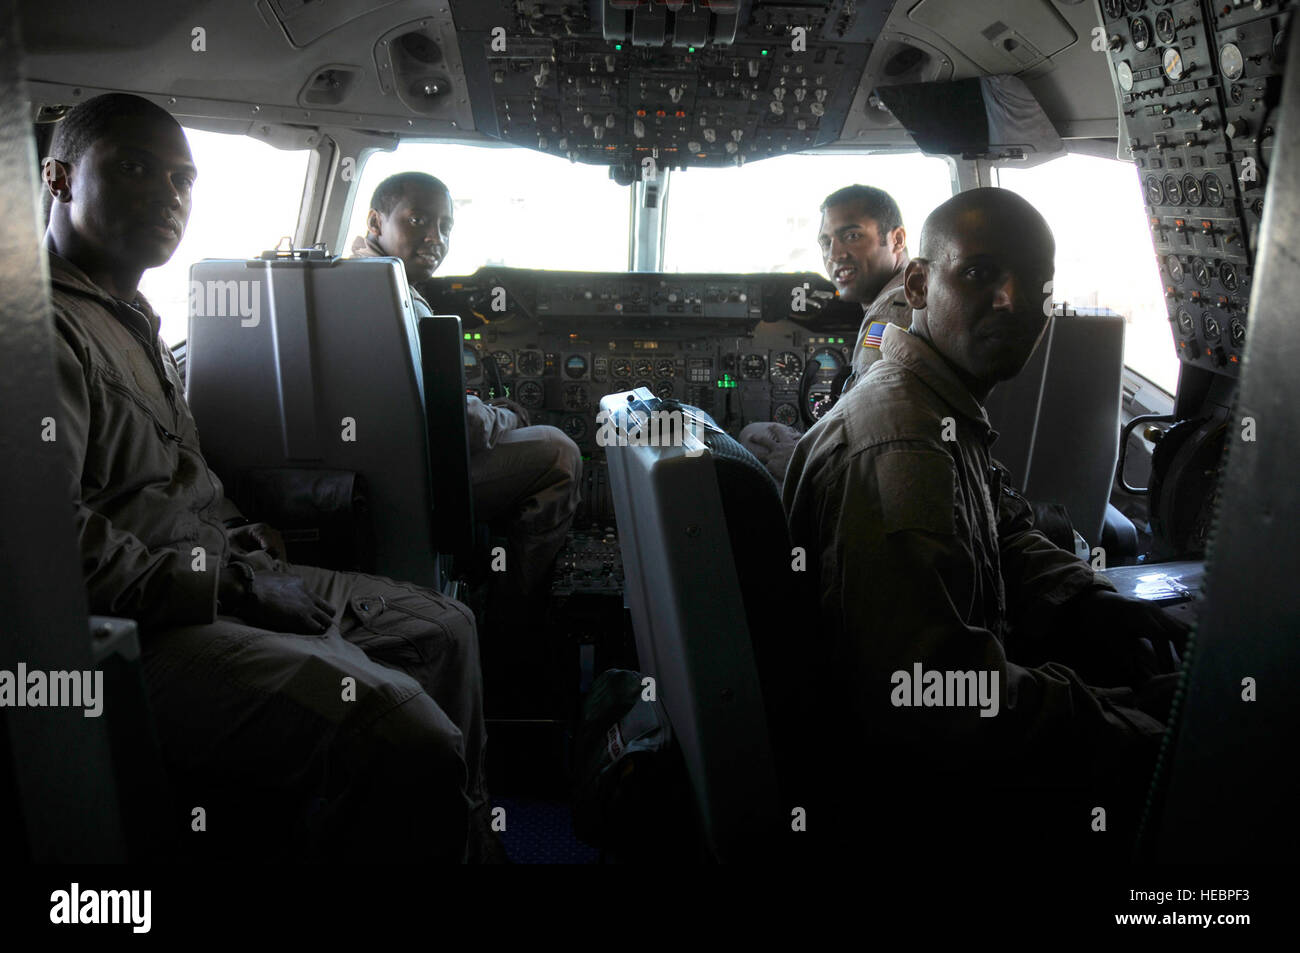 Staff Sgt. Michael Smith, Capt. Jon Cato, 1st Lt. Jason Brown and Tech Sgt. Elton Phew. 908th Expeditionary Air Refueling Squadron, KC-10 Extender crew, prepare for a historical flight, Feb. 29. The all black crew flew together in celebration of African-American History Month paying tribute to the Tuskegee Airmen that paved the way. Sergeant Smith is deployed from McGuire Air Force Base, N.J., and hails from Baltimore, Md. Cato is deployed from Travis AFB, Calif., and hails from Raleigh, N.C. Brown is deployed from McGuire AFB, N.J., and hails from Arvada, Colo. Phew is deployed from McGuire A Stock Photo